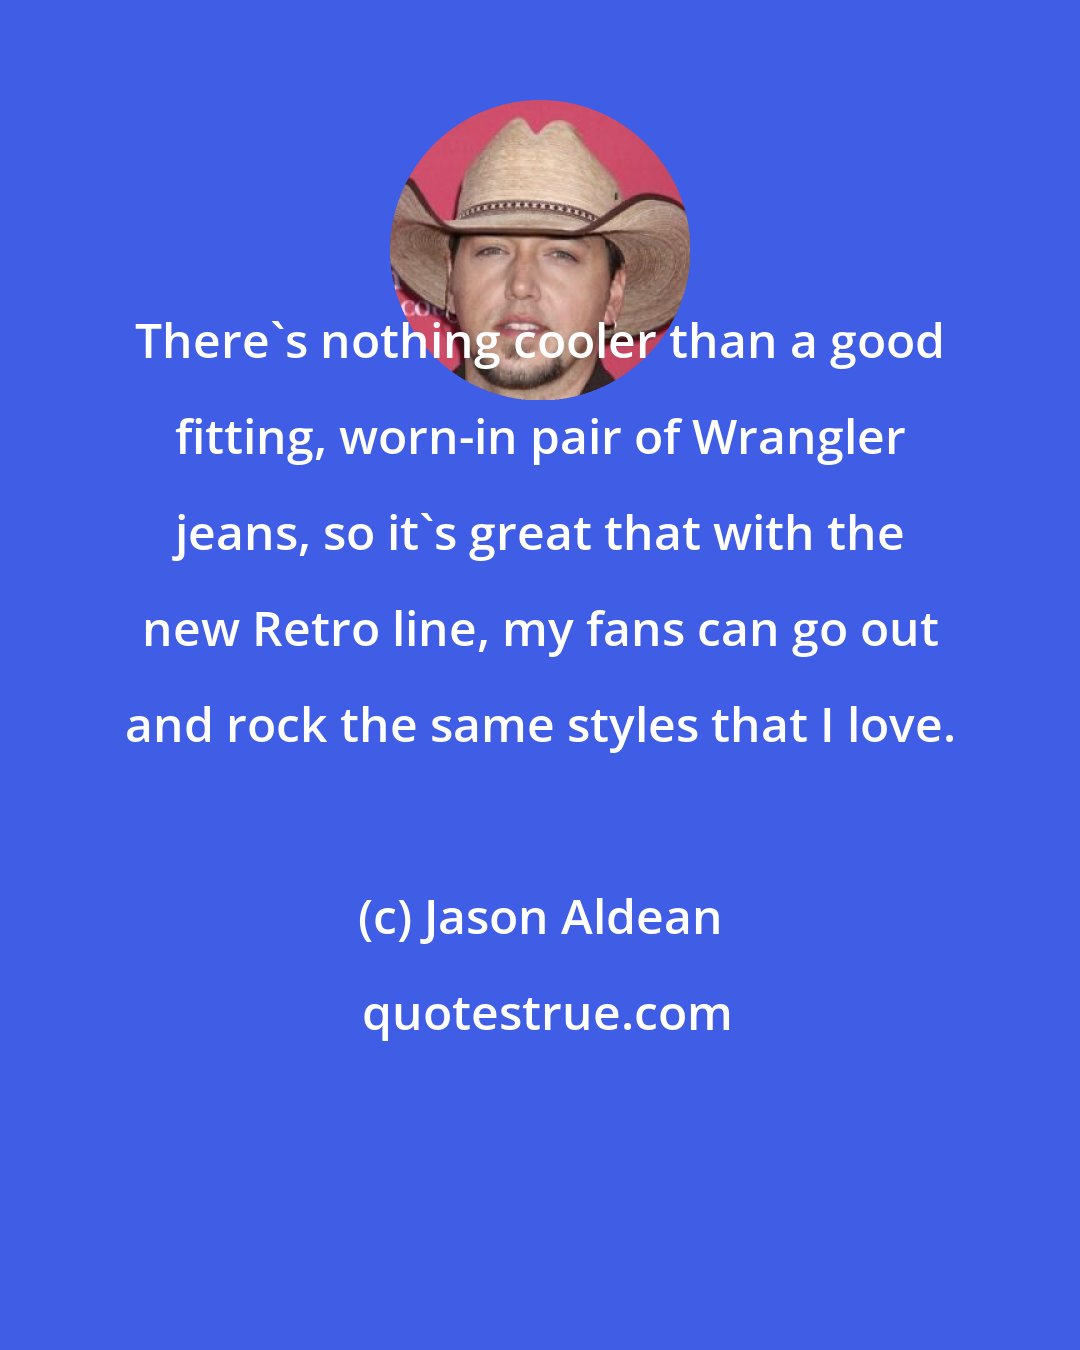 Jason Aldean: There's nothing cooler than a good fitting, worn-in pair of Wrangler jeans, so it's great that with the new Retro line, my fans can go out and rock the same styles that I love.